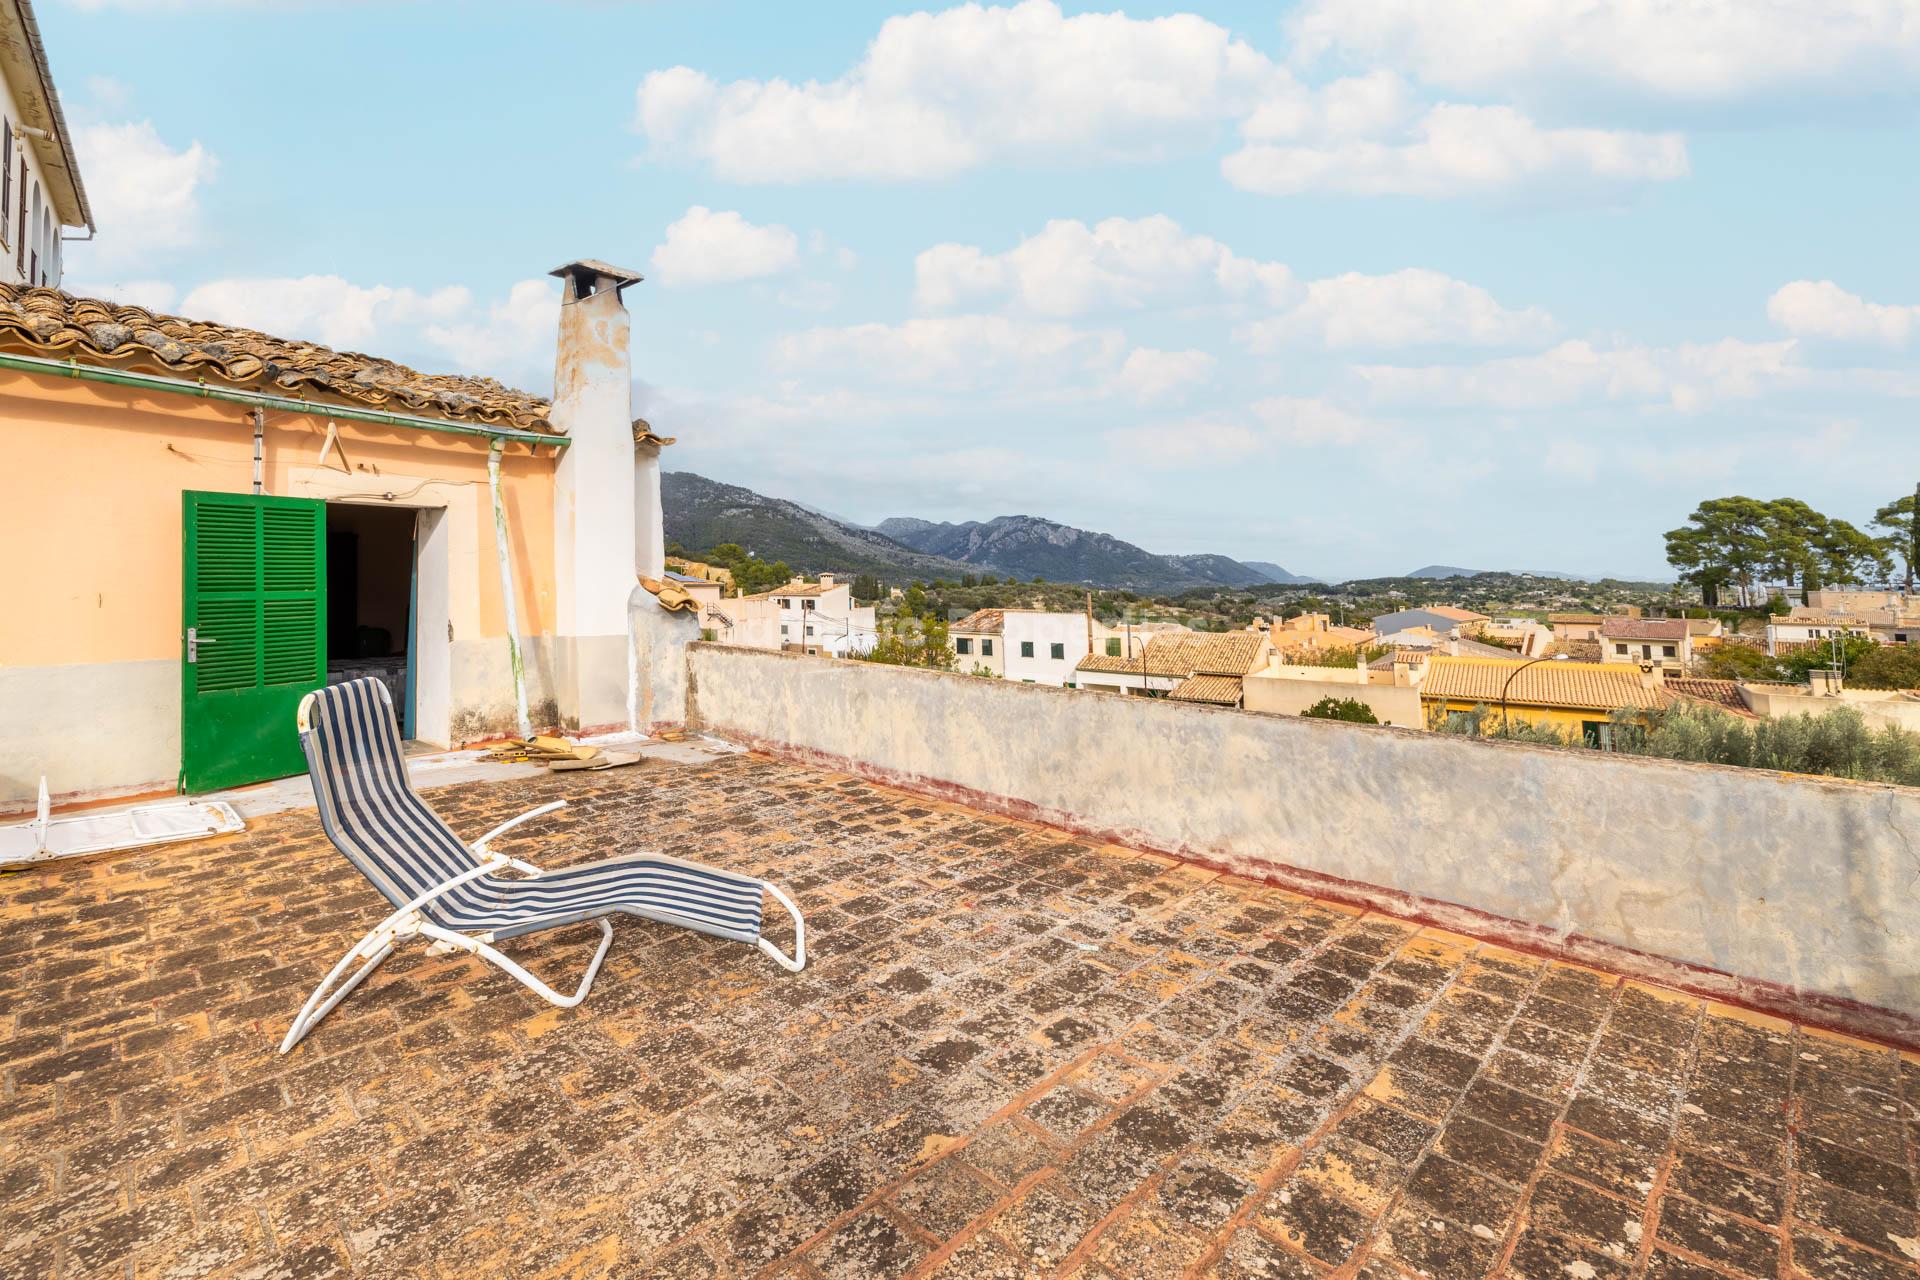 Townhouse to reform, for sale in the centre of Selva, Mallorca